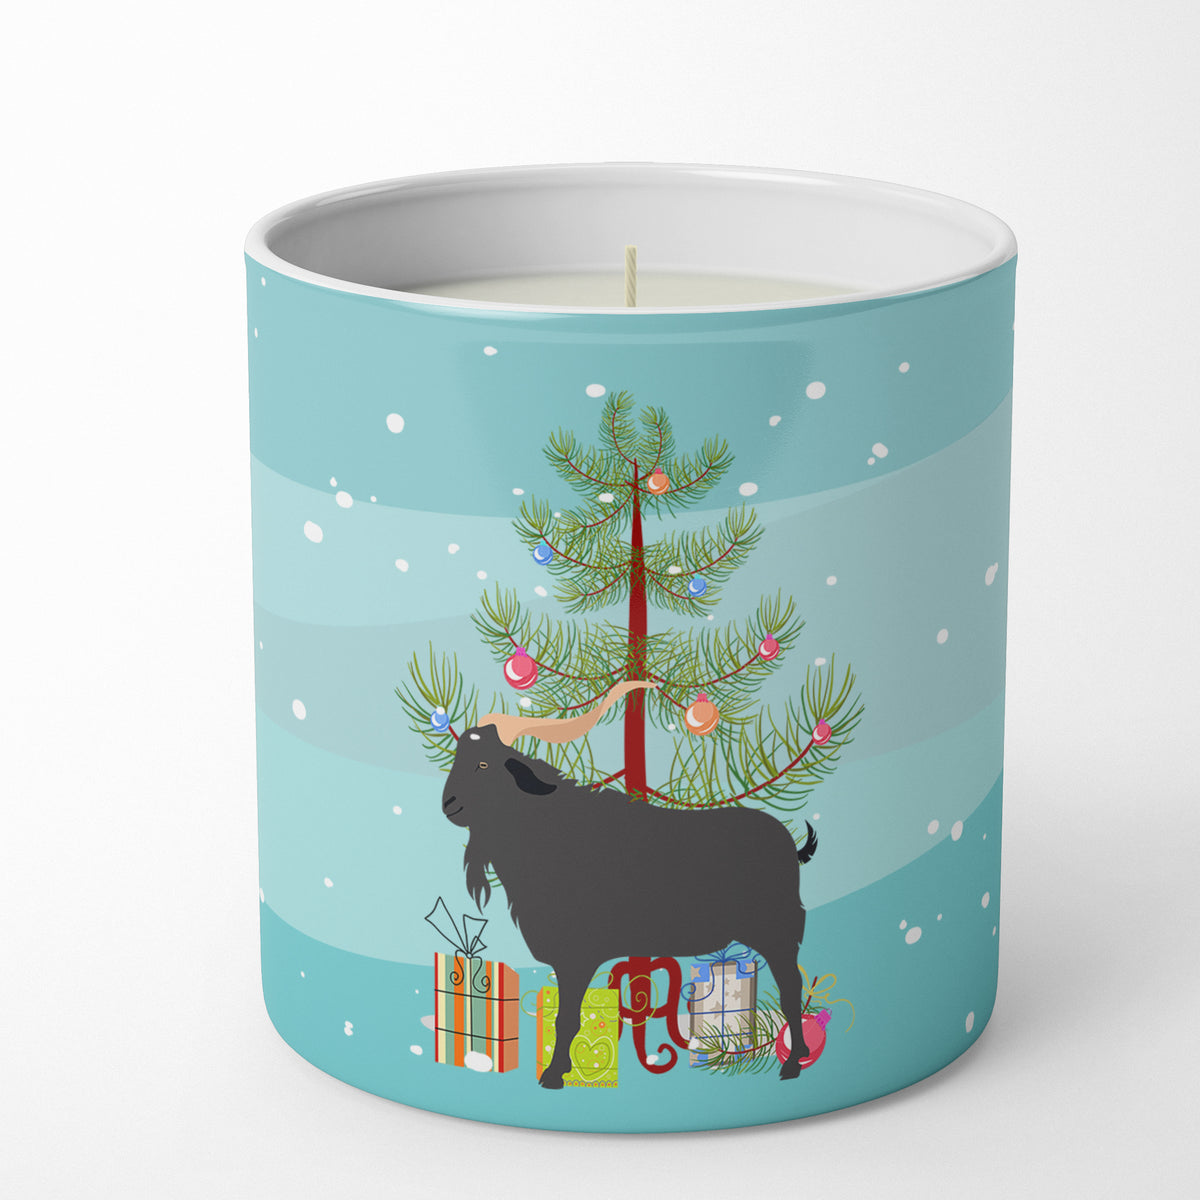 Buy this Verata Goat Christmas 10 oz Decorative Soy Candle